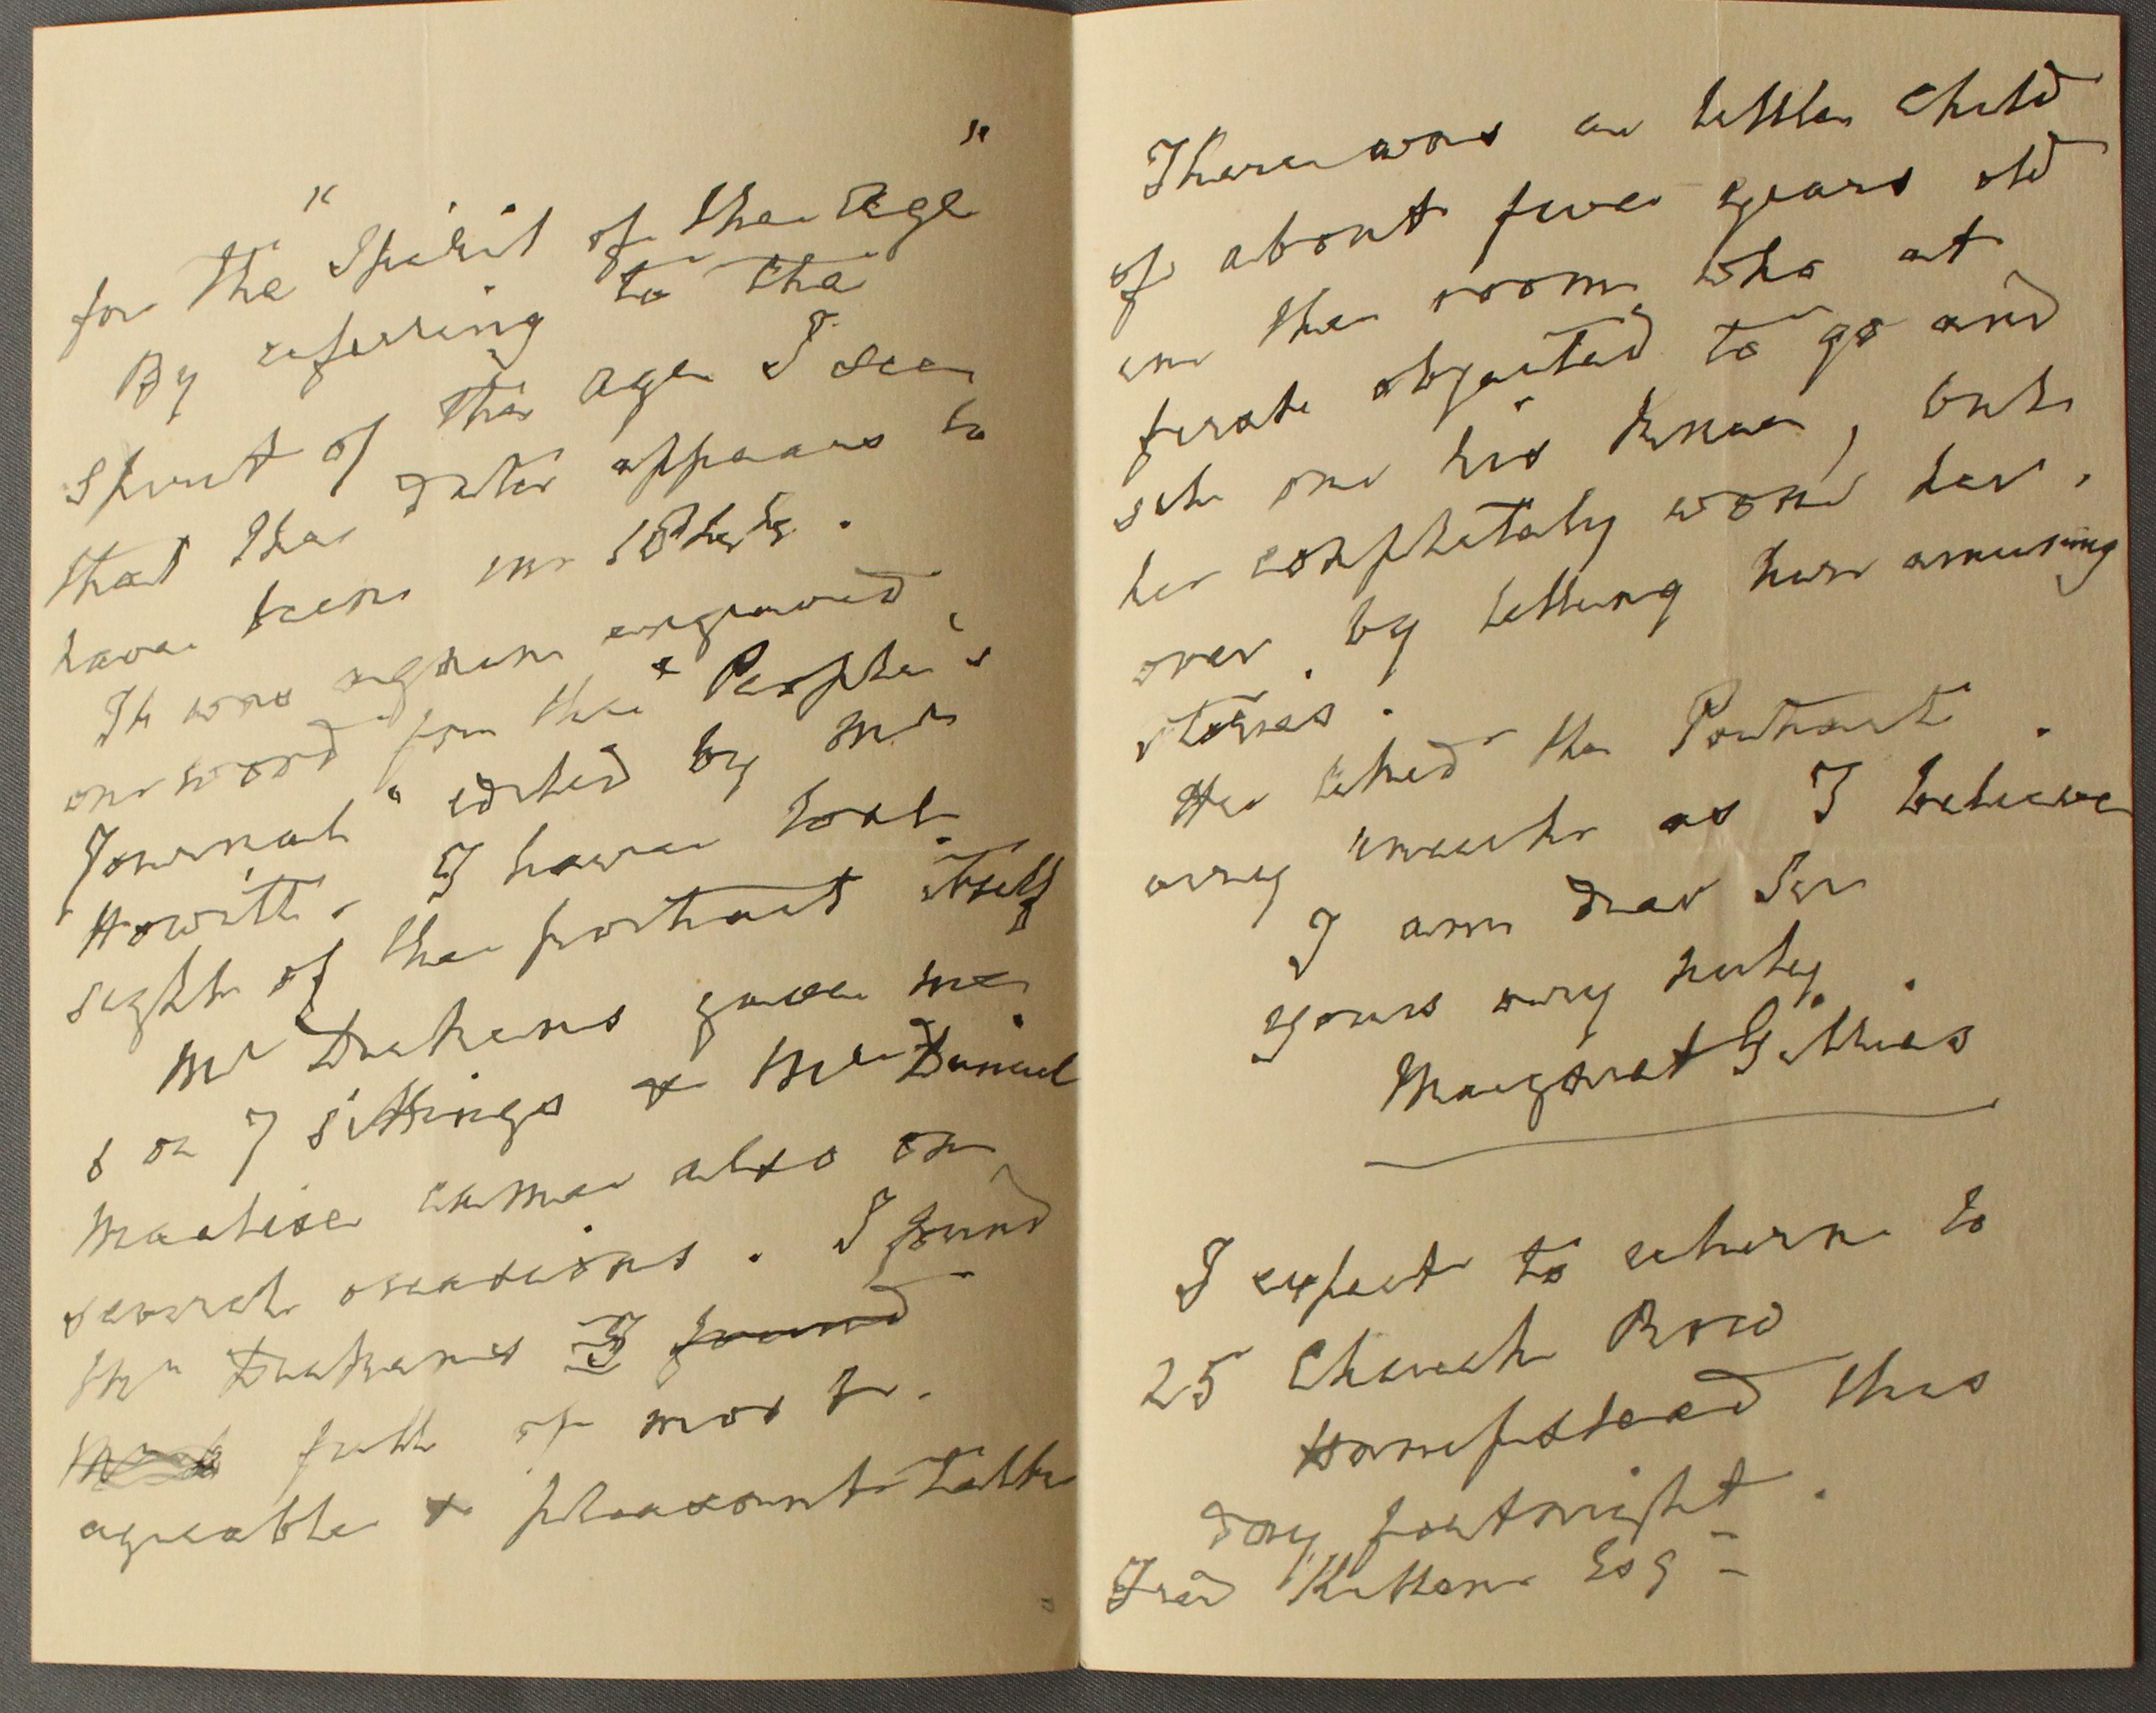 Margaret Gillies writes to Frederic Kitton on 8 July 1886, reminiscing about the portrait she painted of Dickens. She recalls he gave her 6 or 7 sittings and he was ‘a most agreeable and pleasant talker’. © Charles Dickens Museum